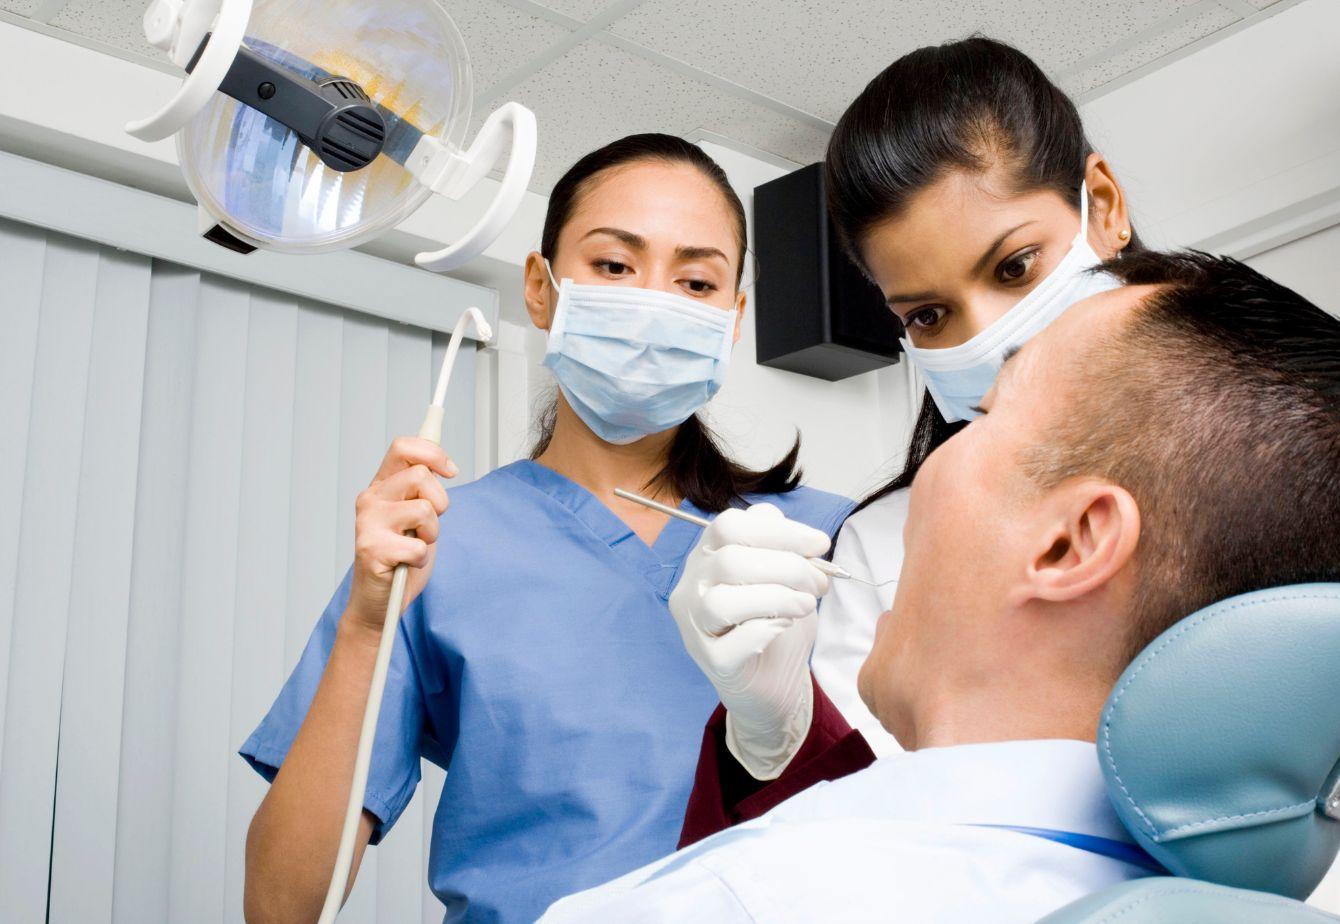 Dental Hygienists in the USA: Education, Roles, Salary, and Path – A Complete Guide